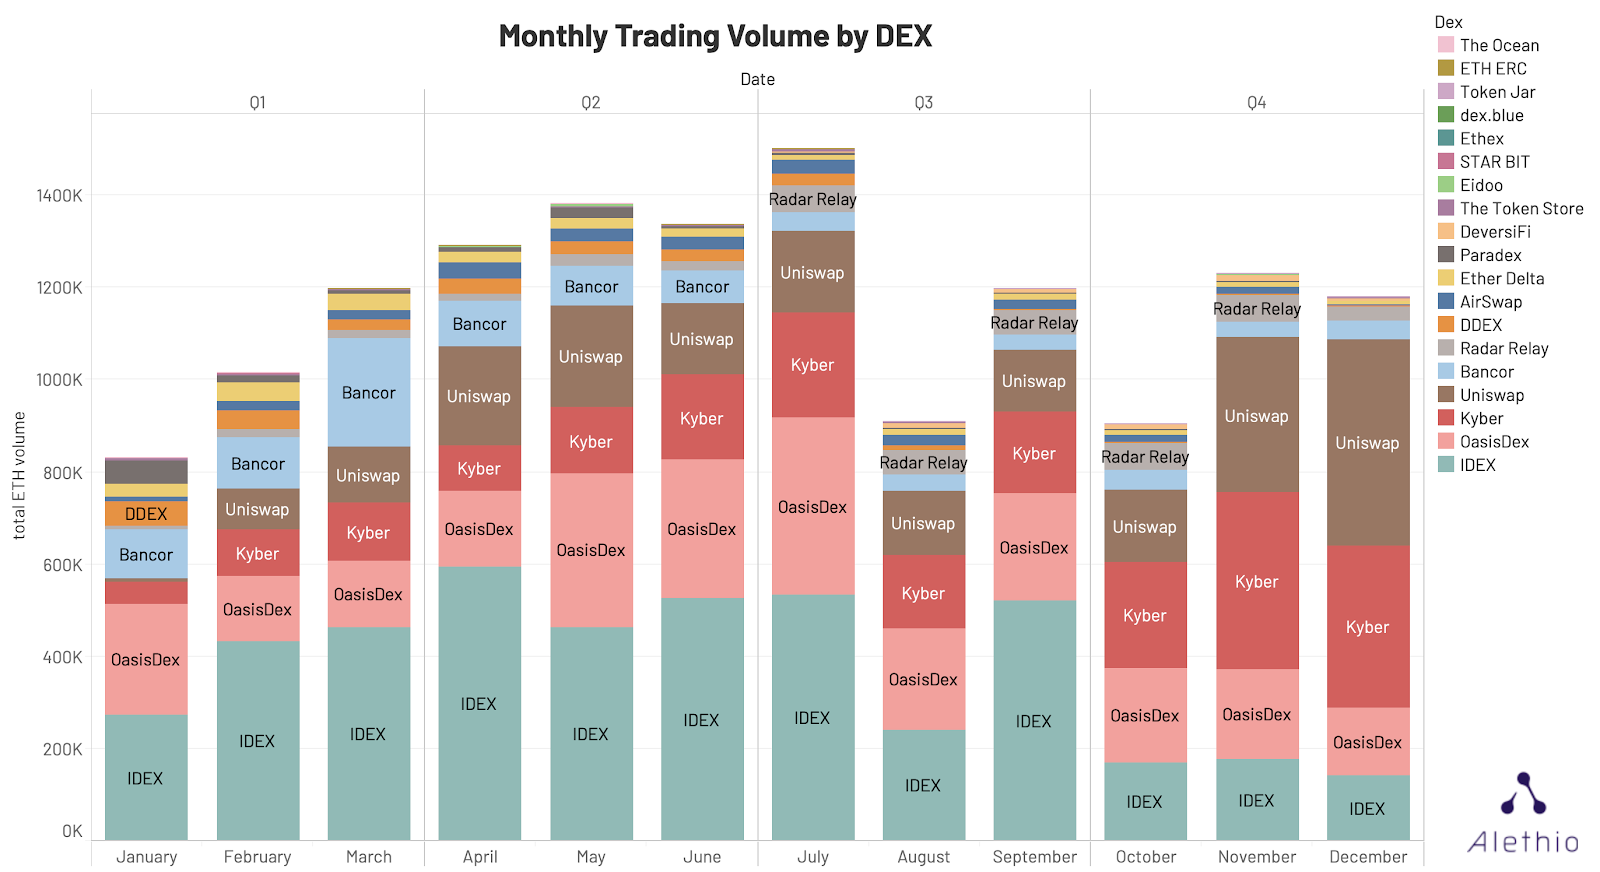 Monthly Trading Volume by DEX in 2019